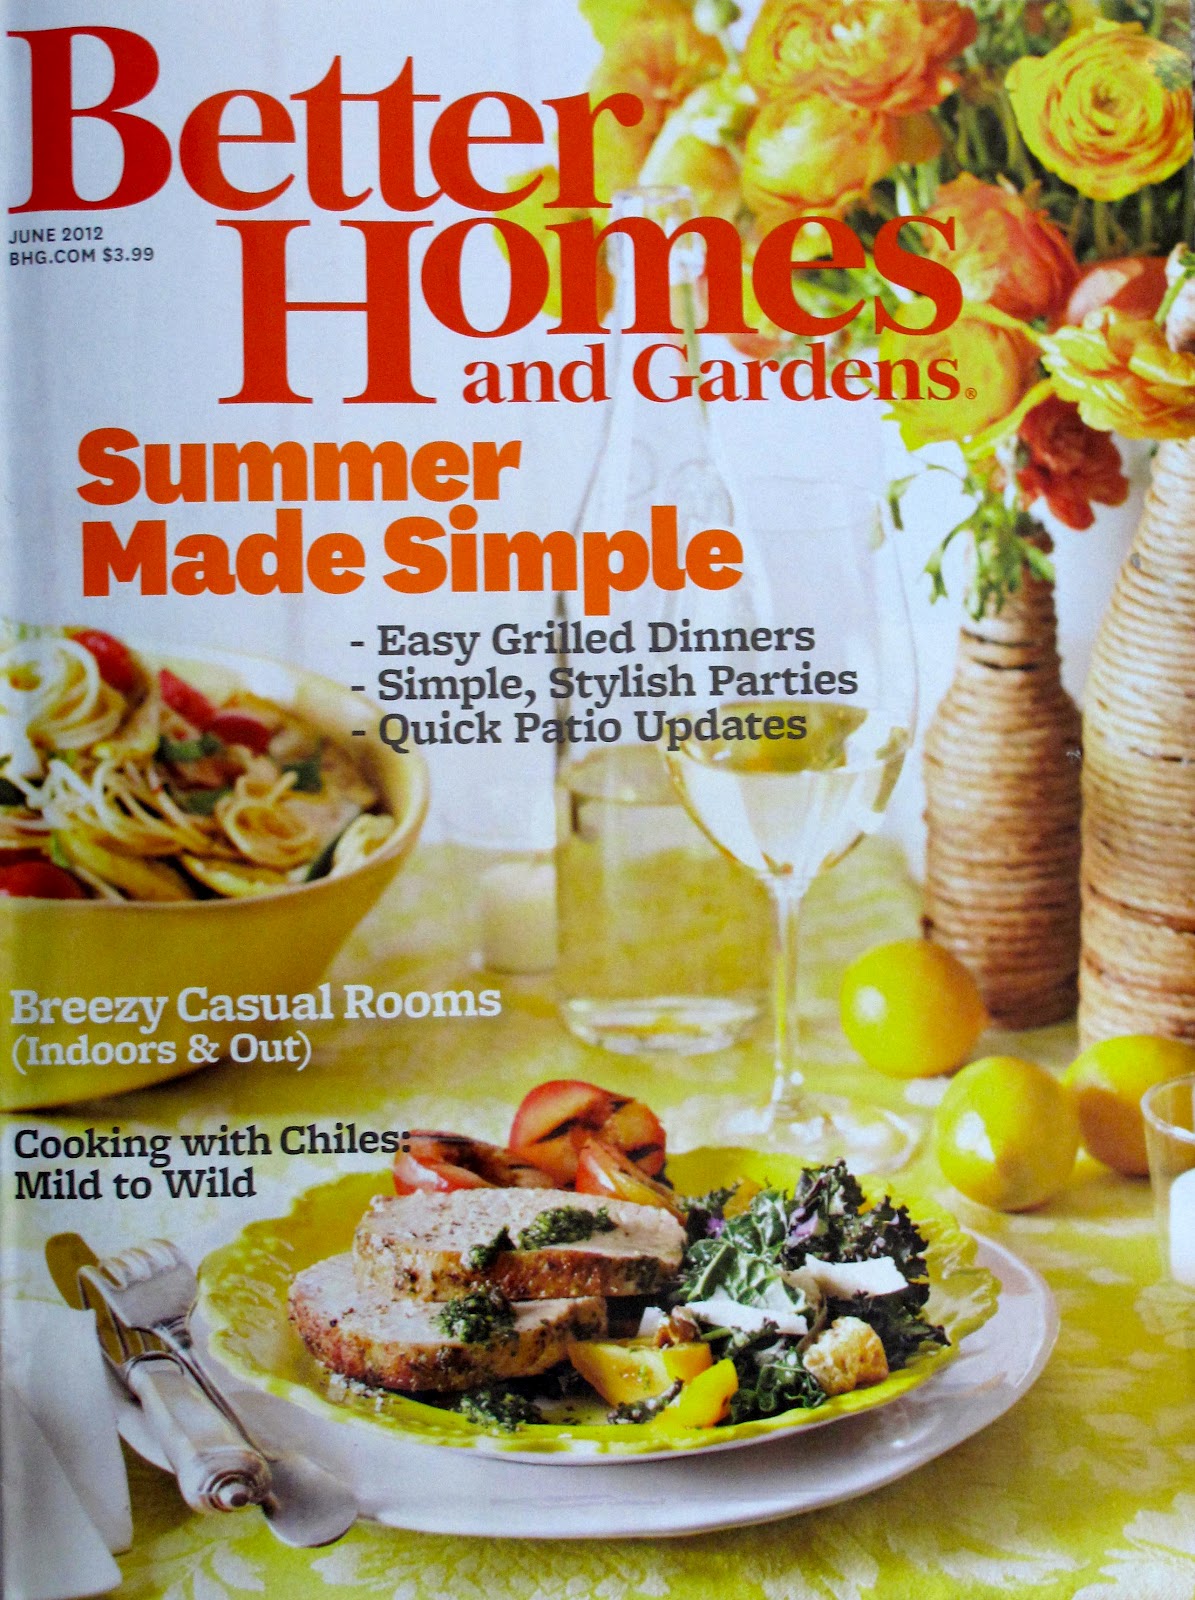 The June Issue Of Better Homes And Gardens Inspired This Post